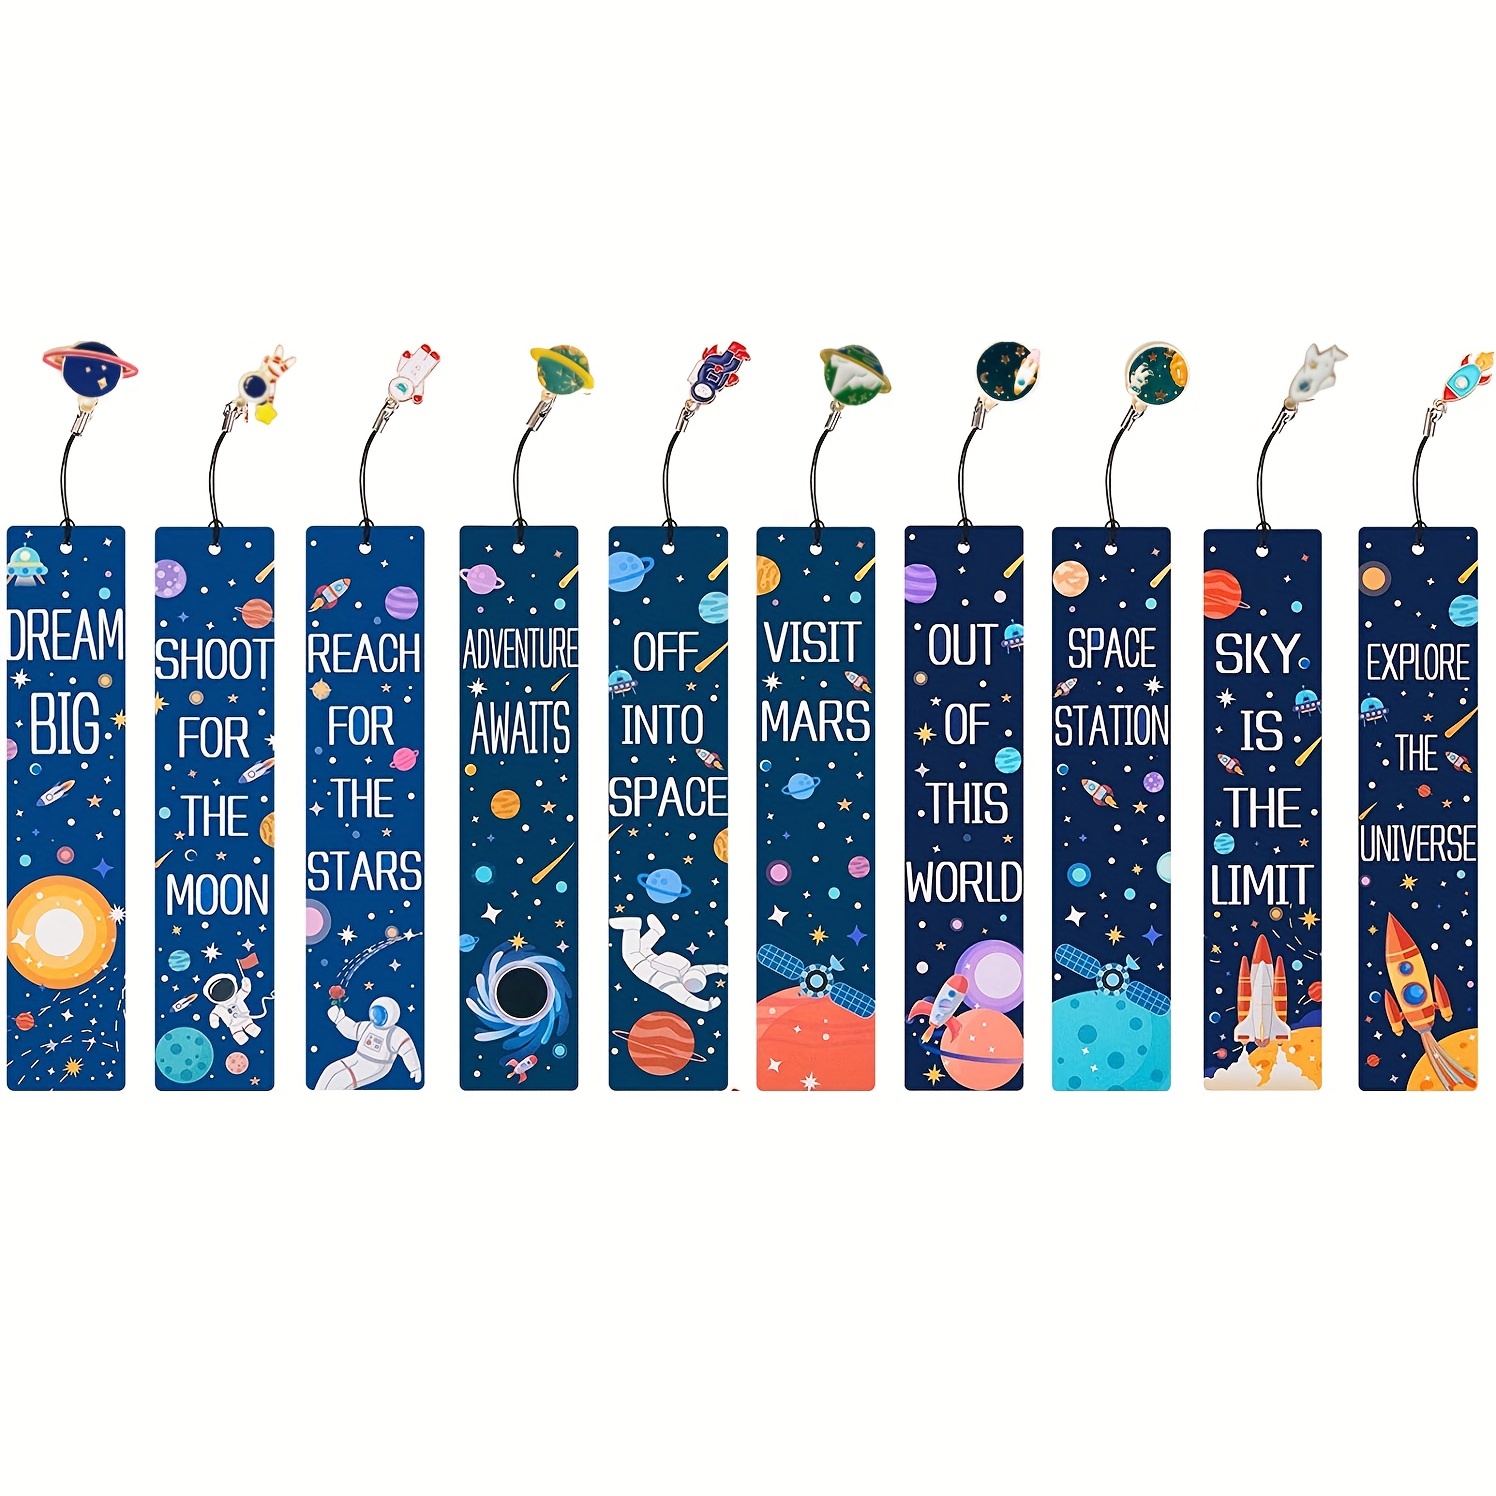 24PCS Cute Bookmarks for Kids, Page Markers Book Markers, Animals Book  Mark, Bookmarks for Women, Page Clips Bookmark for Students Girls School  Home